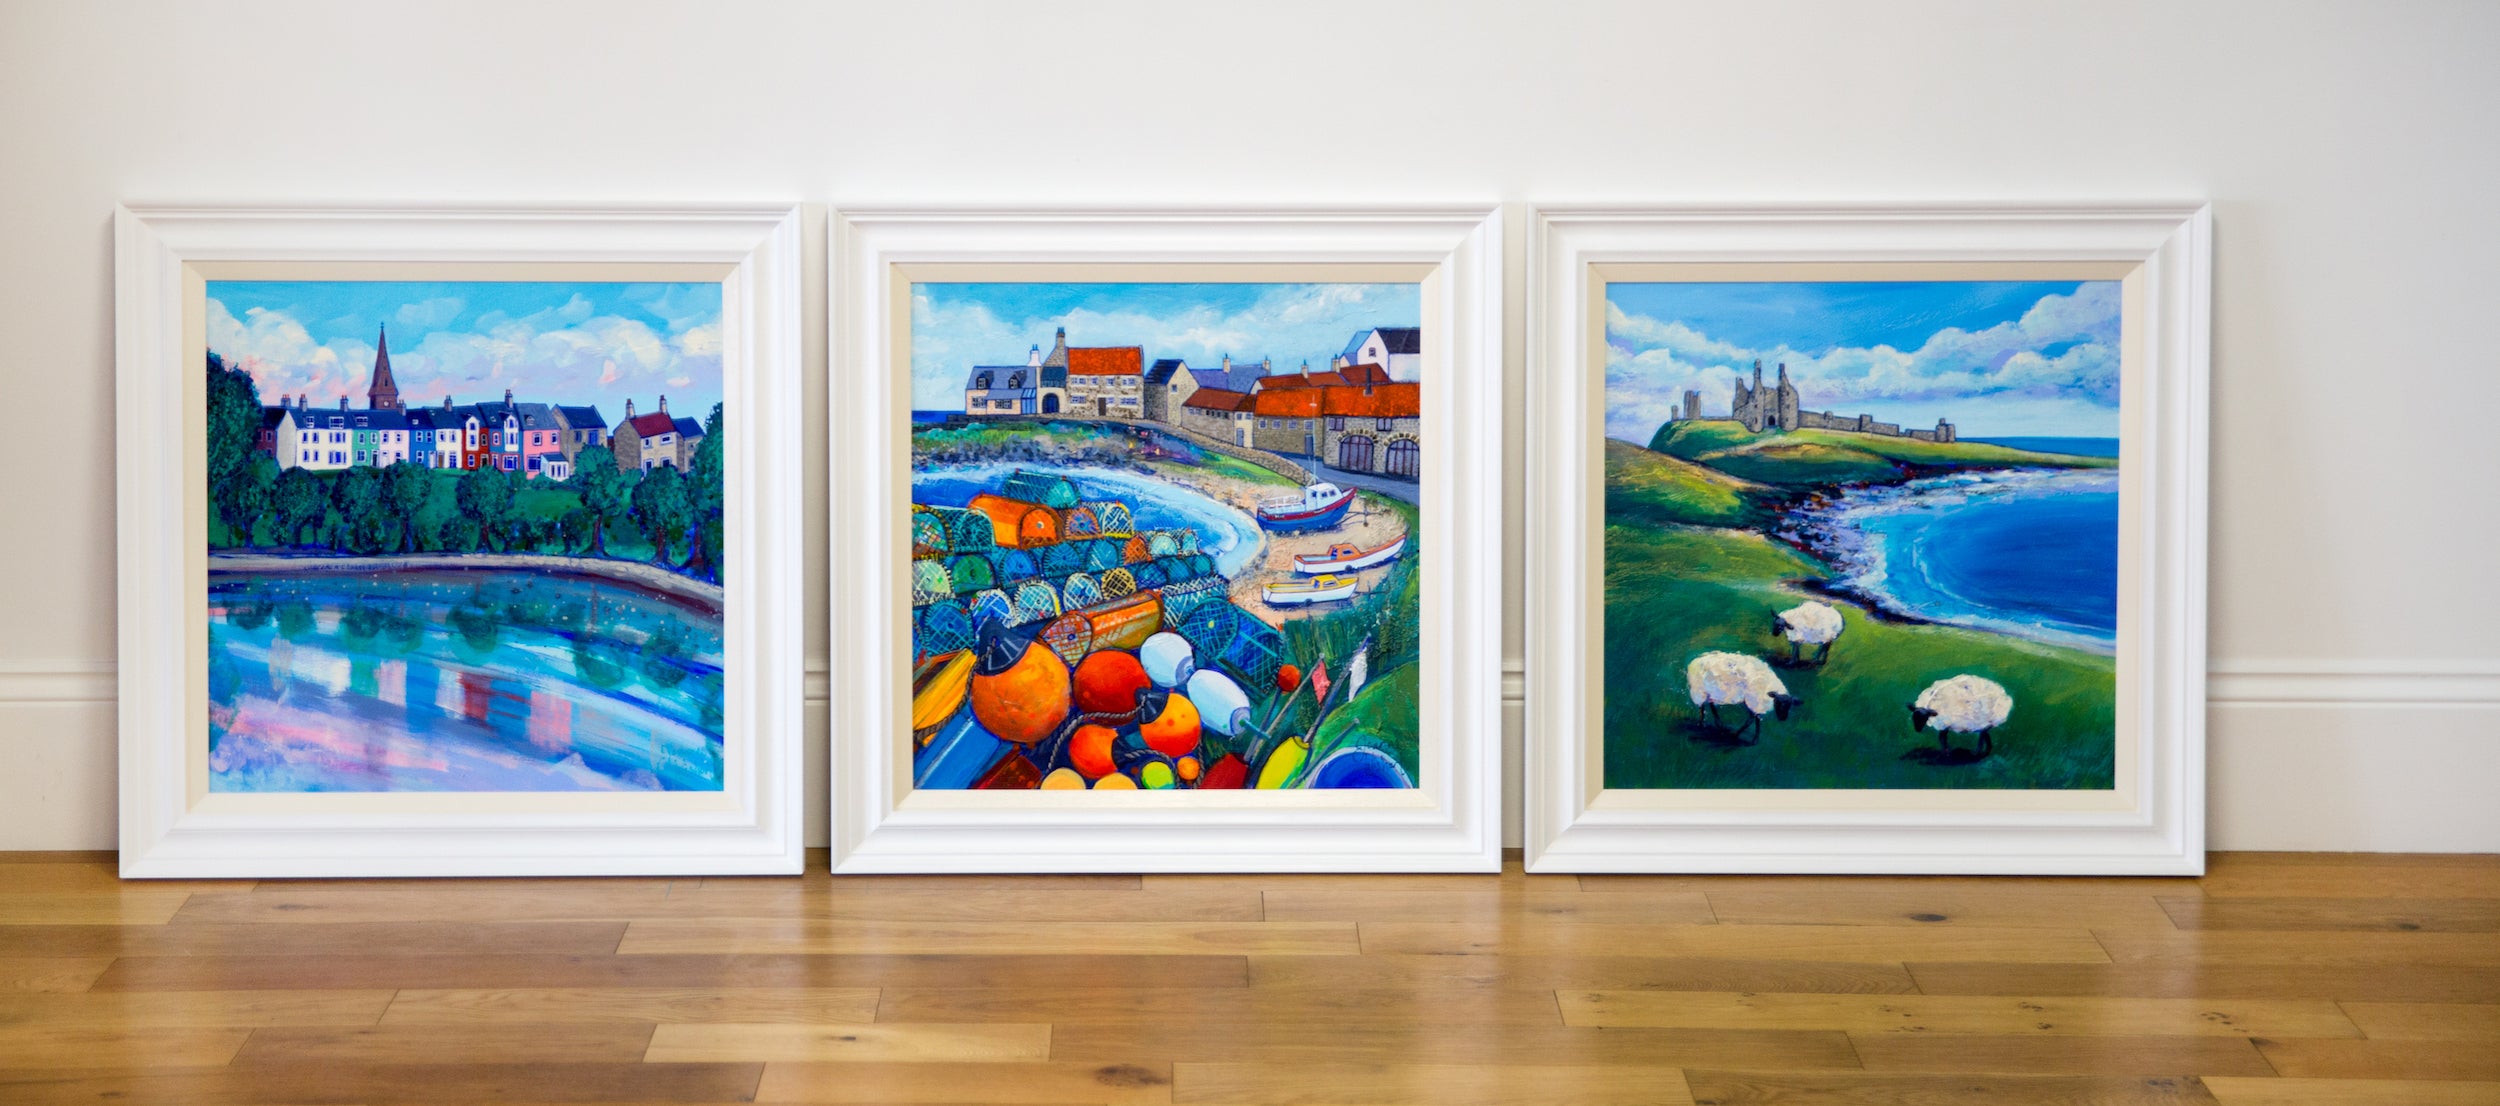 A Row of Three colourful paintings of Northumberland in white wood frames. From left to right Alnmouth featuring a row of colourful cottages. Centre painting is Craster Harbour featuring creels and crails and right the painting features Dunstanburgh Castle with three sheep grazing in the foreground.e